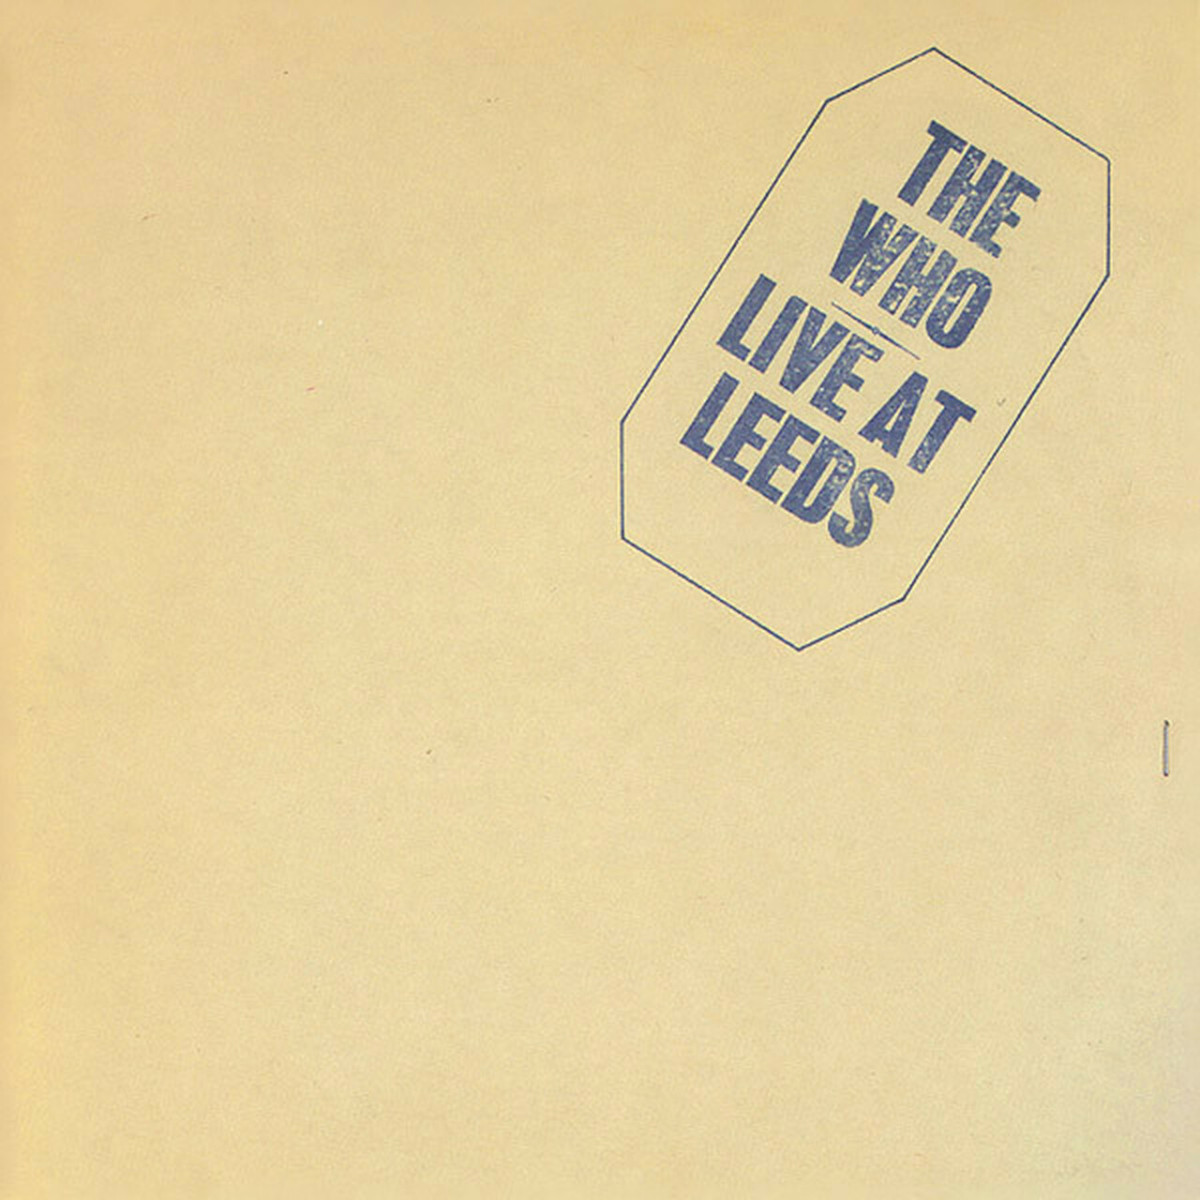 The Who, Live at Leeds large